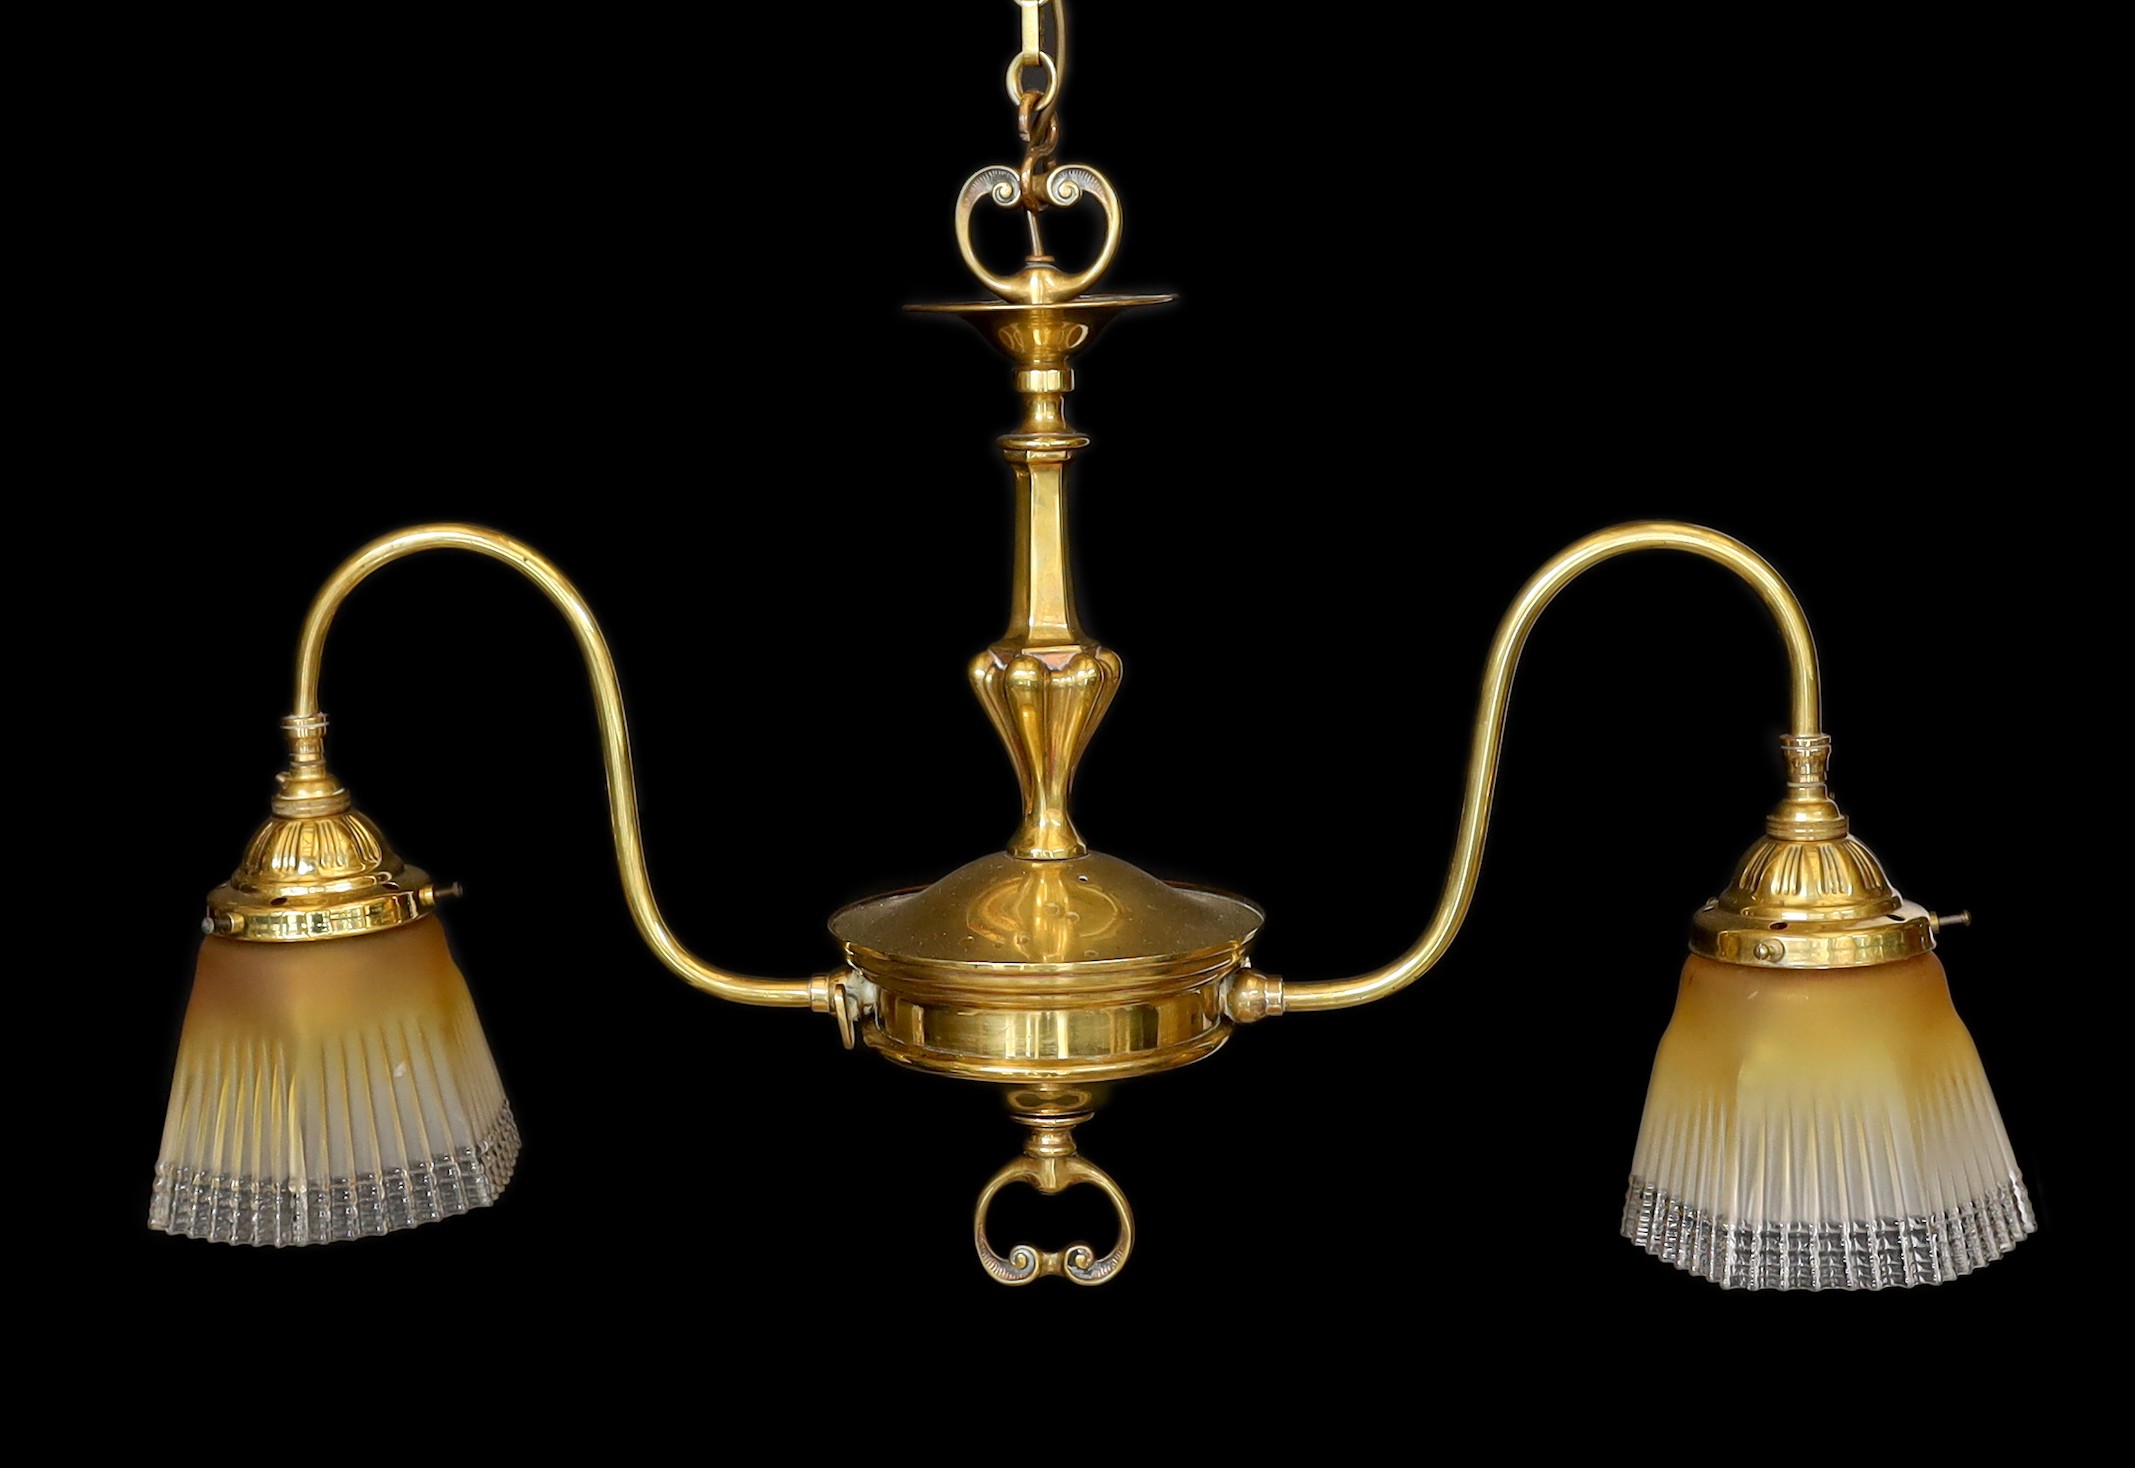 An early 20th century English brass twin branch light fitting with amber tinted tall glass shades